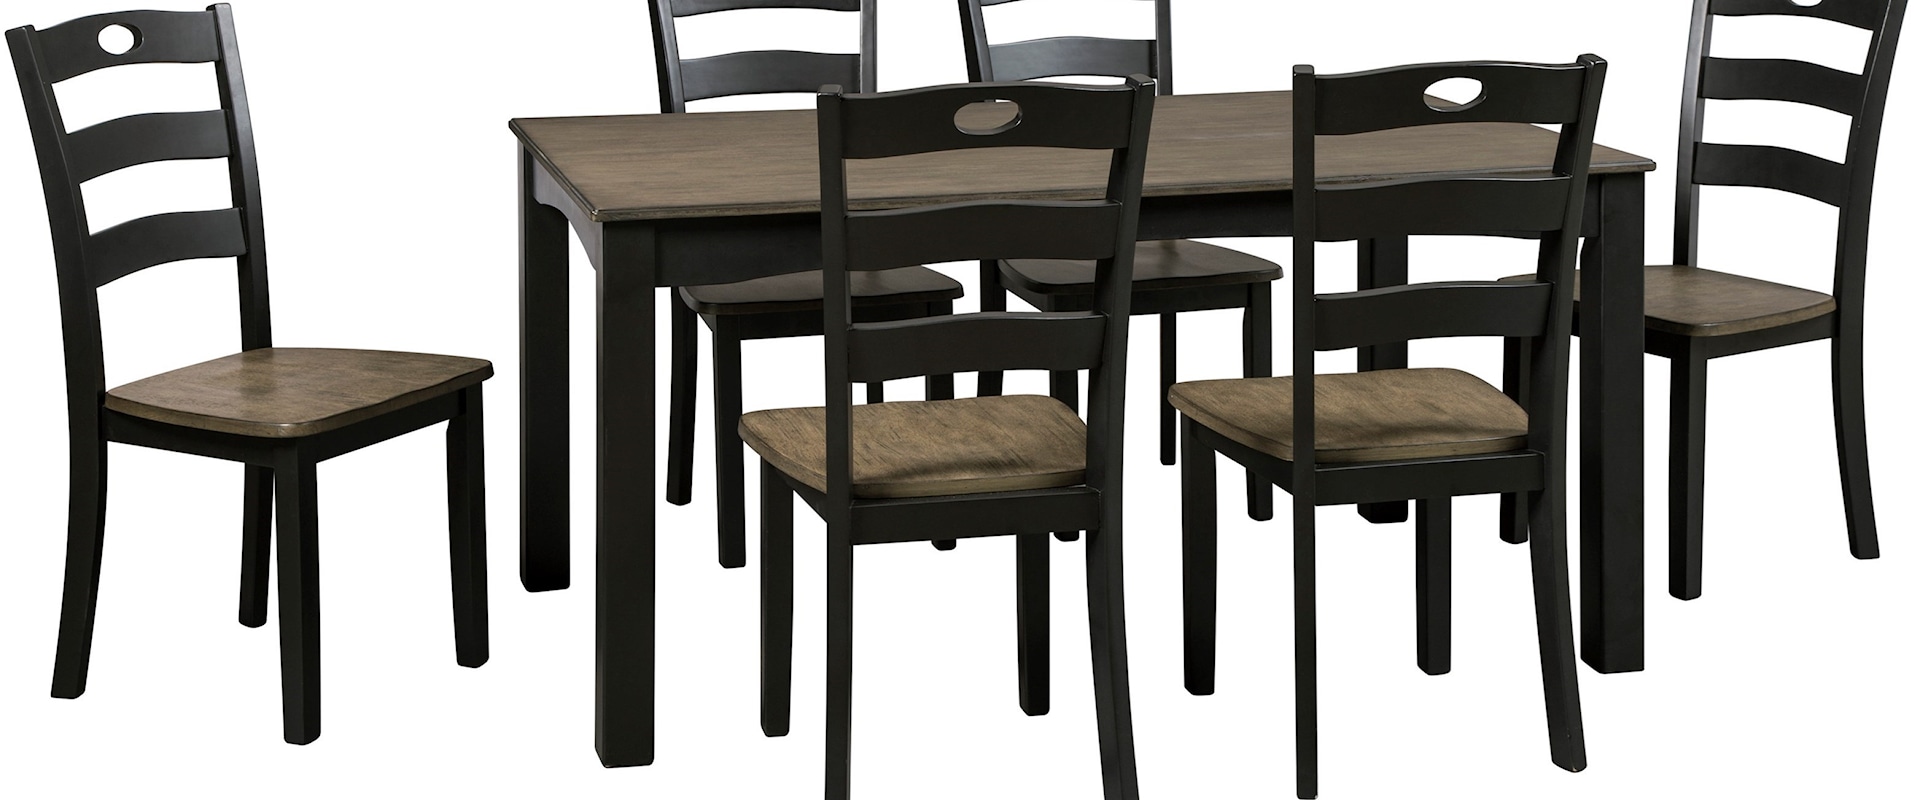 Two-Tone Finish 7-Piece Dining Room Table Set